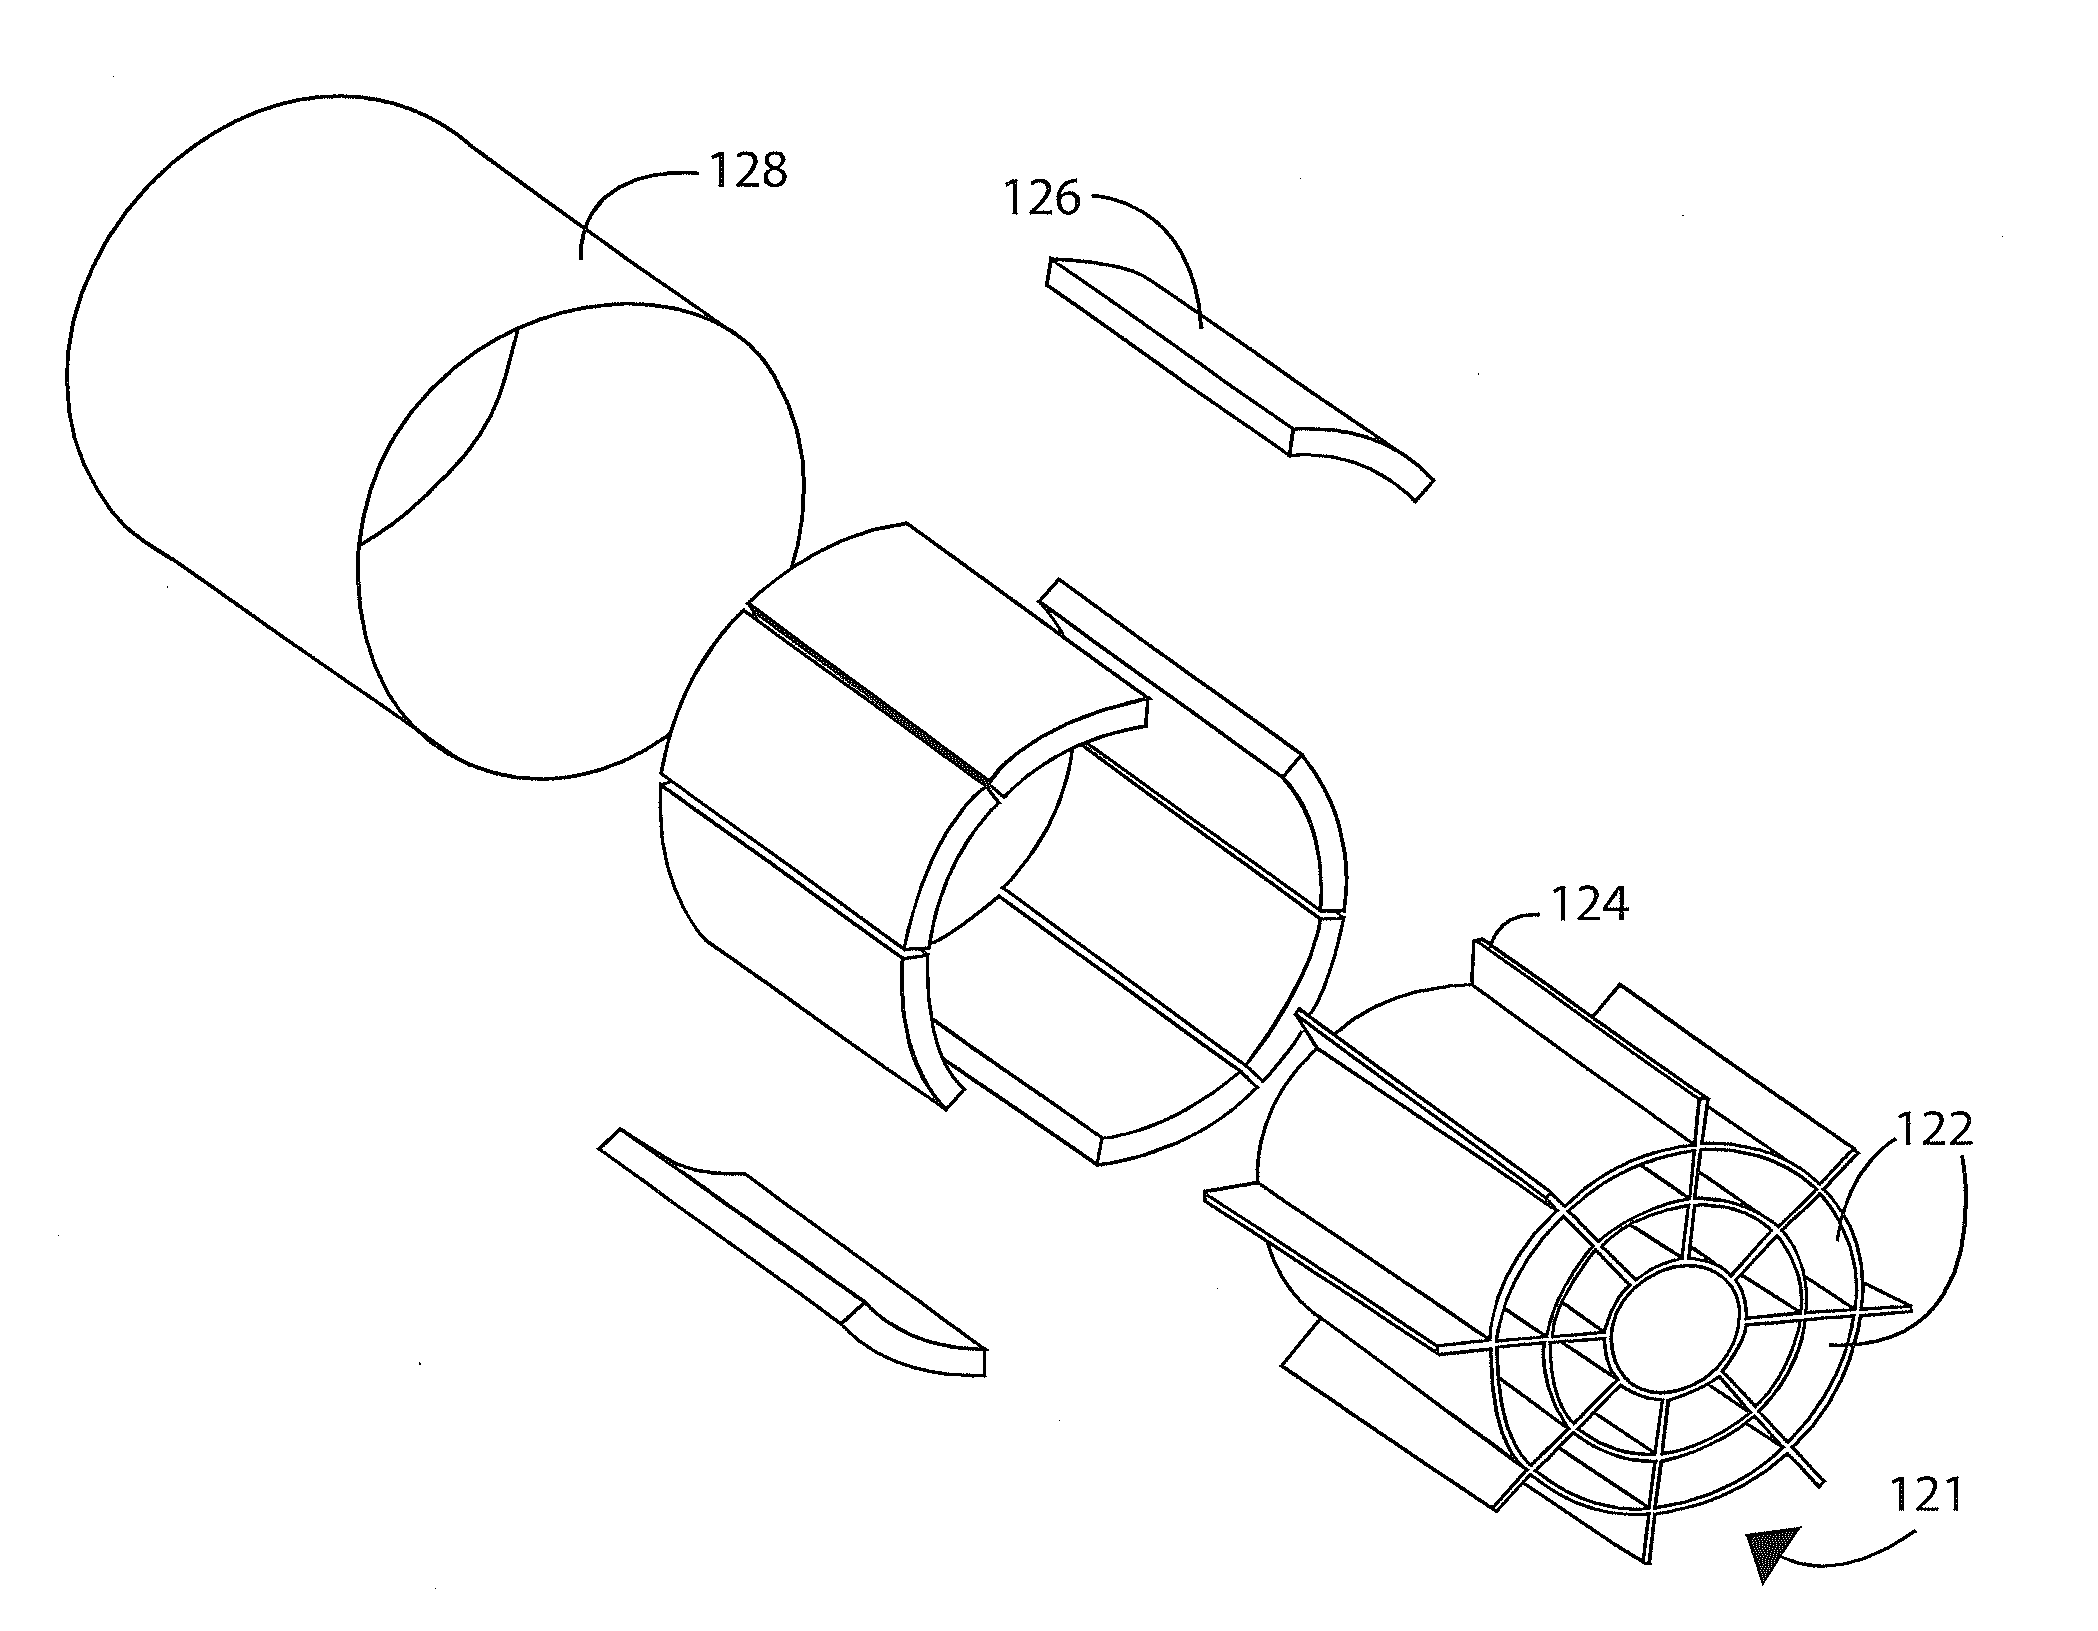 Multi-beam antenna with modular luneburg lens and method of lens manufacture